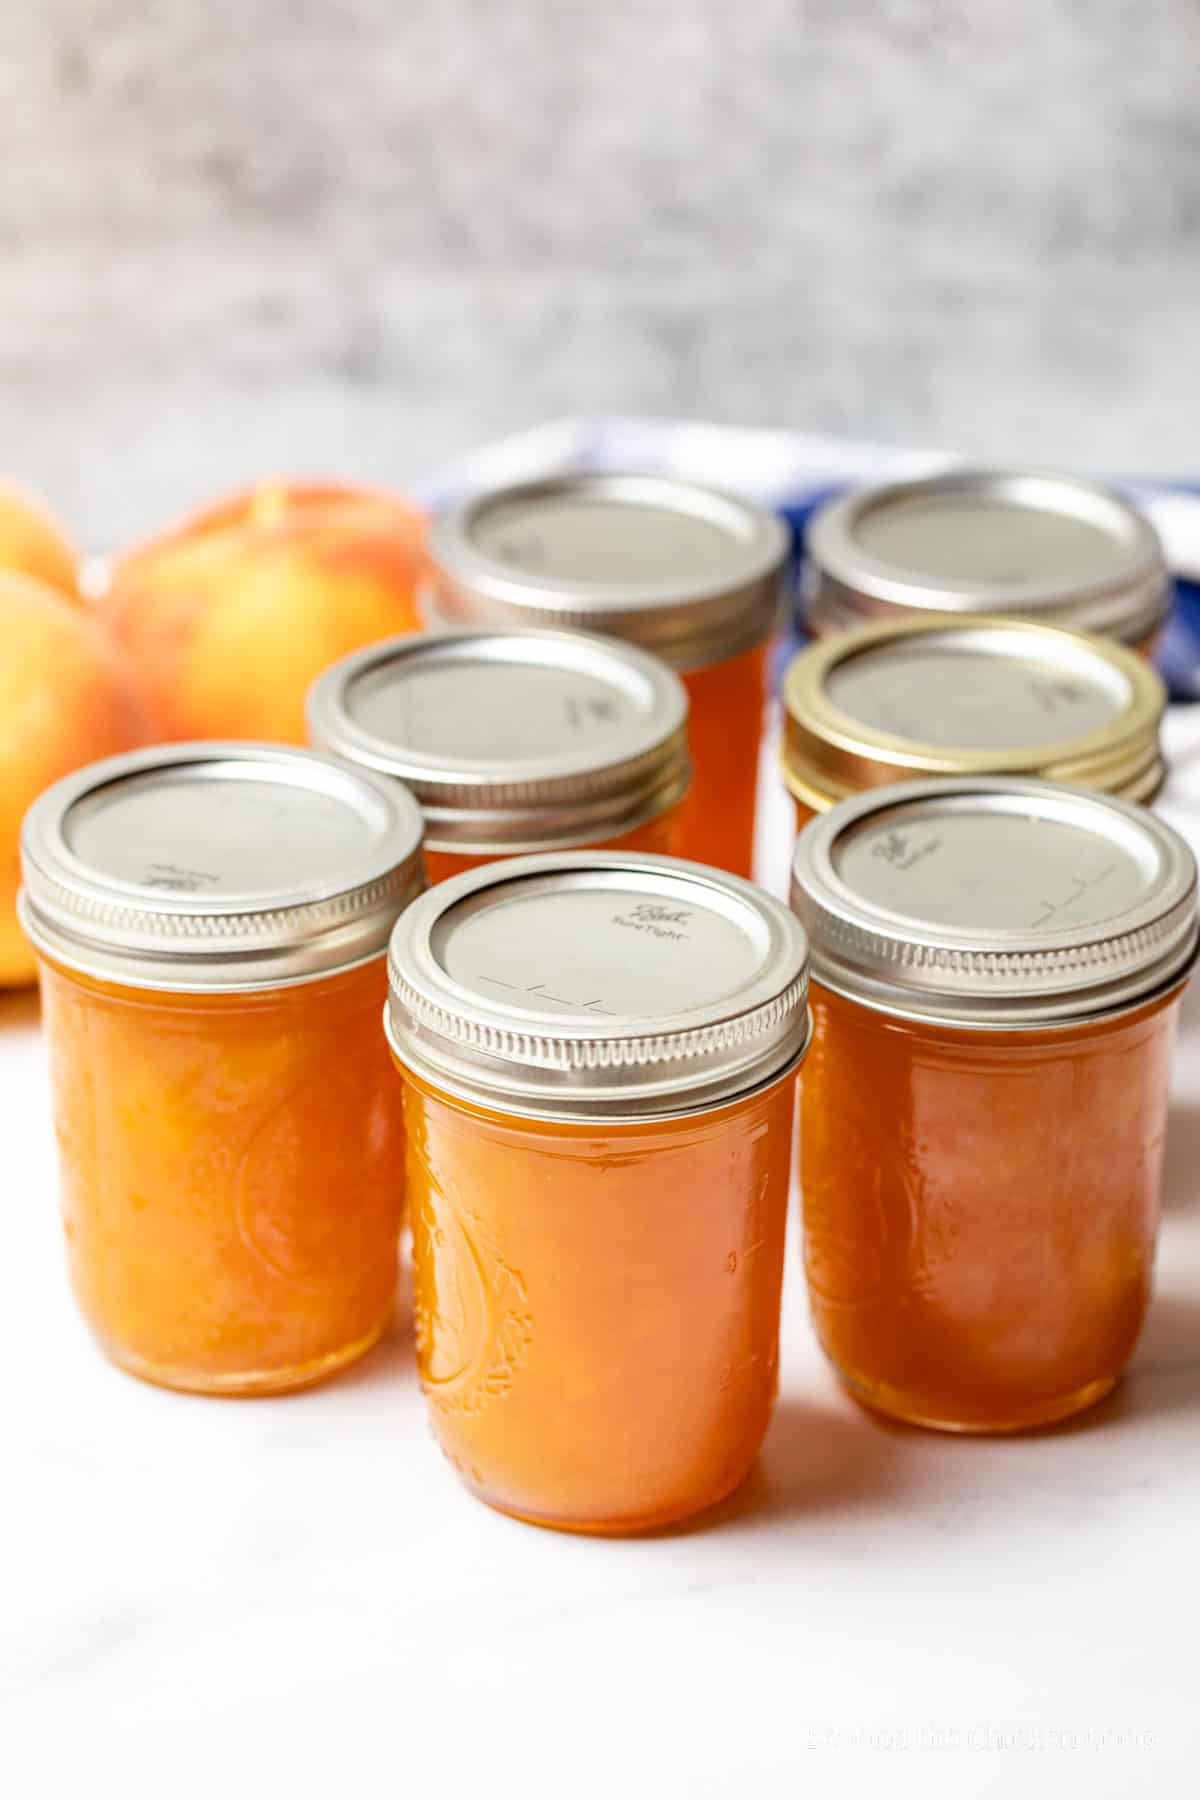 Small jars filled with peach jam.